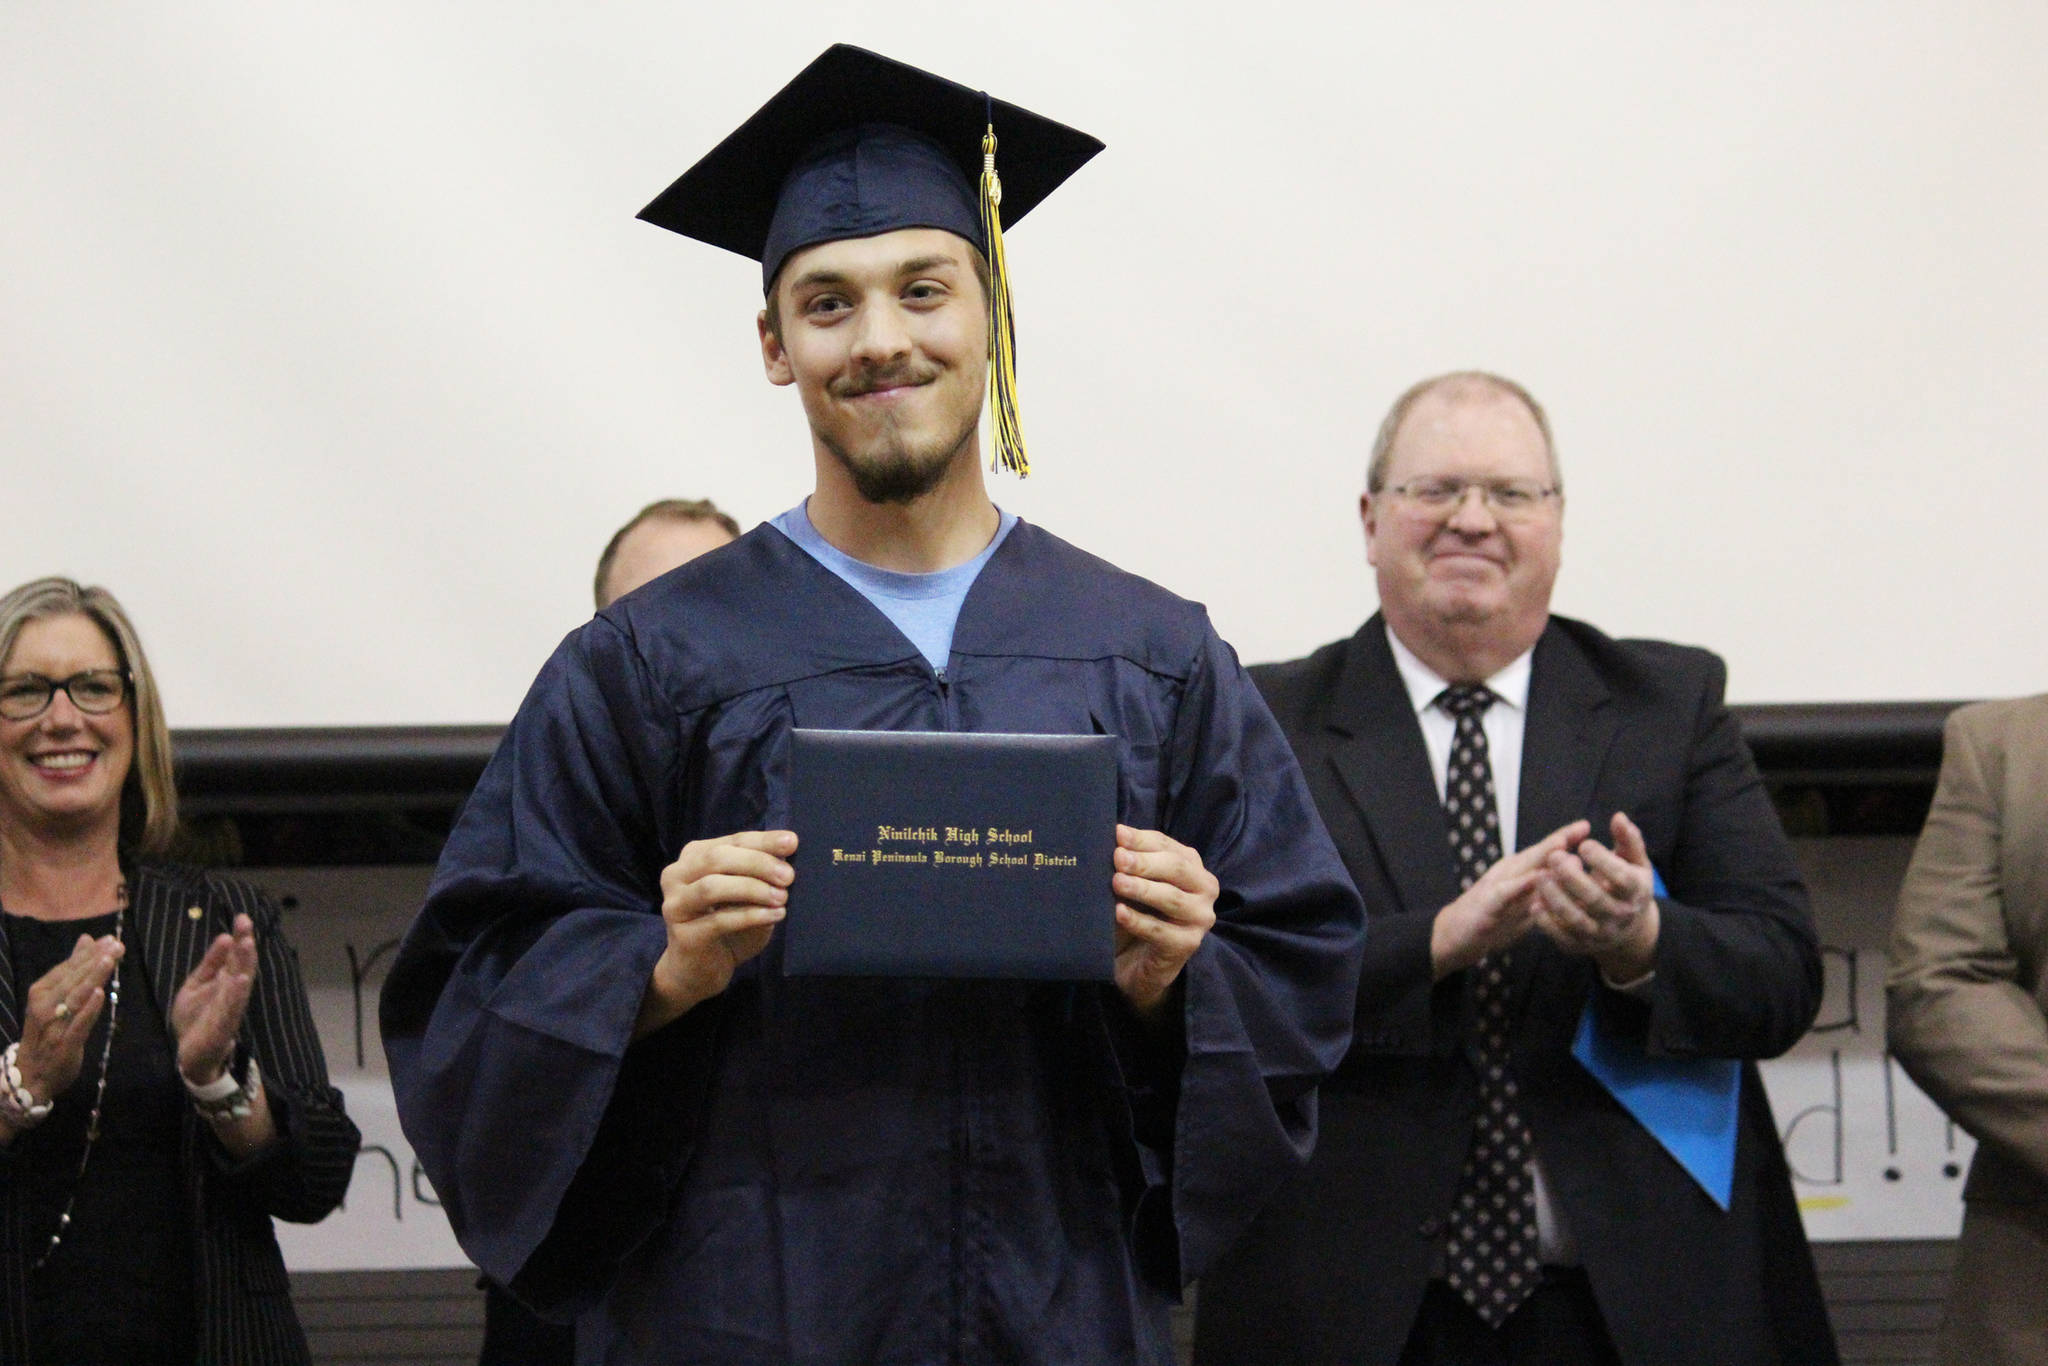 Ninilchik School graduate Jacob Shell receives his diploma during a Tuesday, May 21, 2019 graduation ceremony at the school in Ninilchik, Alaska. (Photo by Megan Pacer/Homer News)